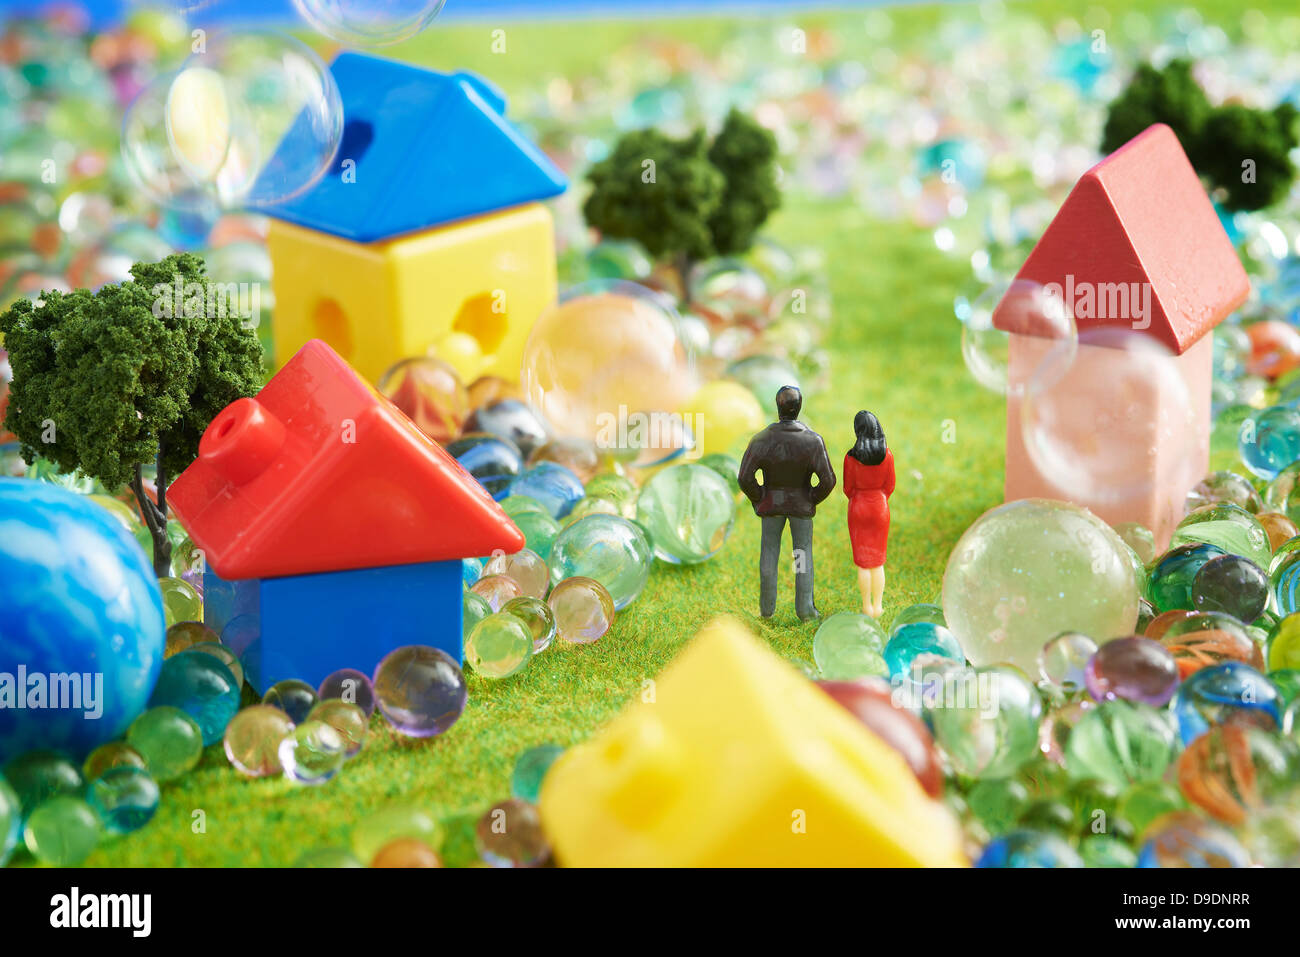 Figurines and houses made from plastic blocks with marbles Stock Photo